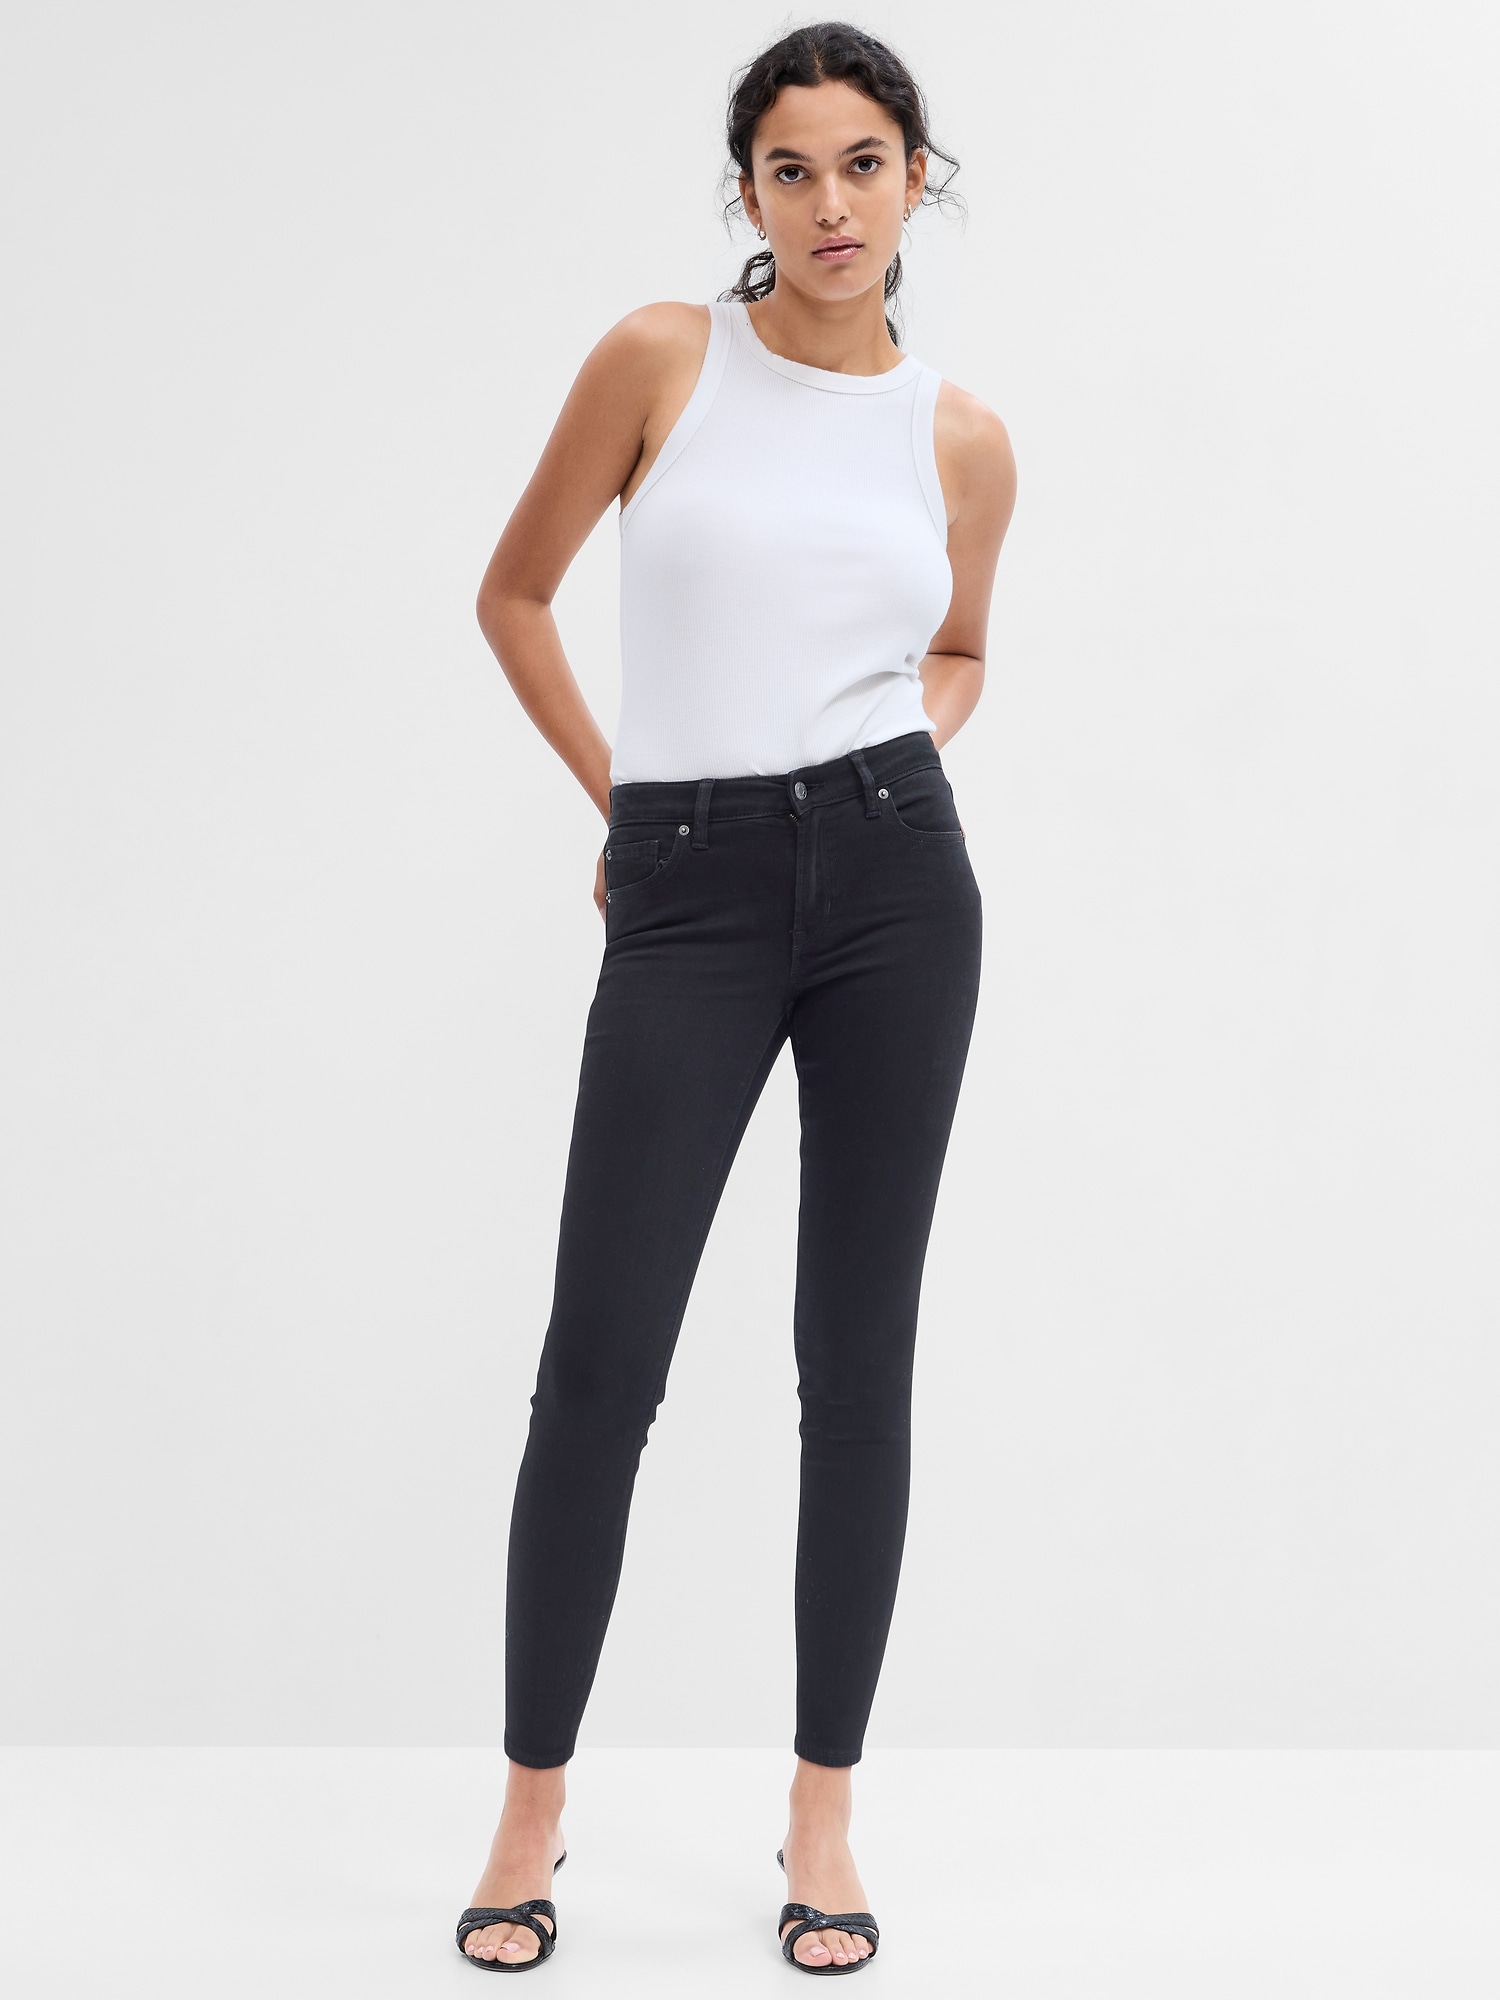 Gap High Rise Universal Legging Jeans 12 31 Black Embroidered Rose NWT $79